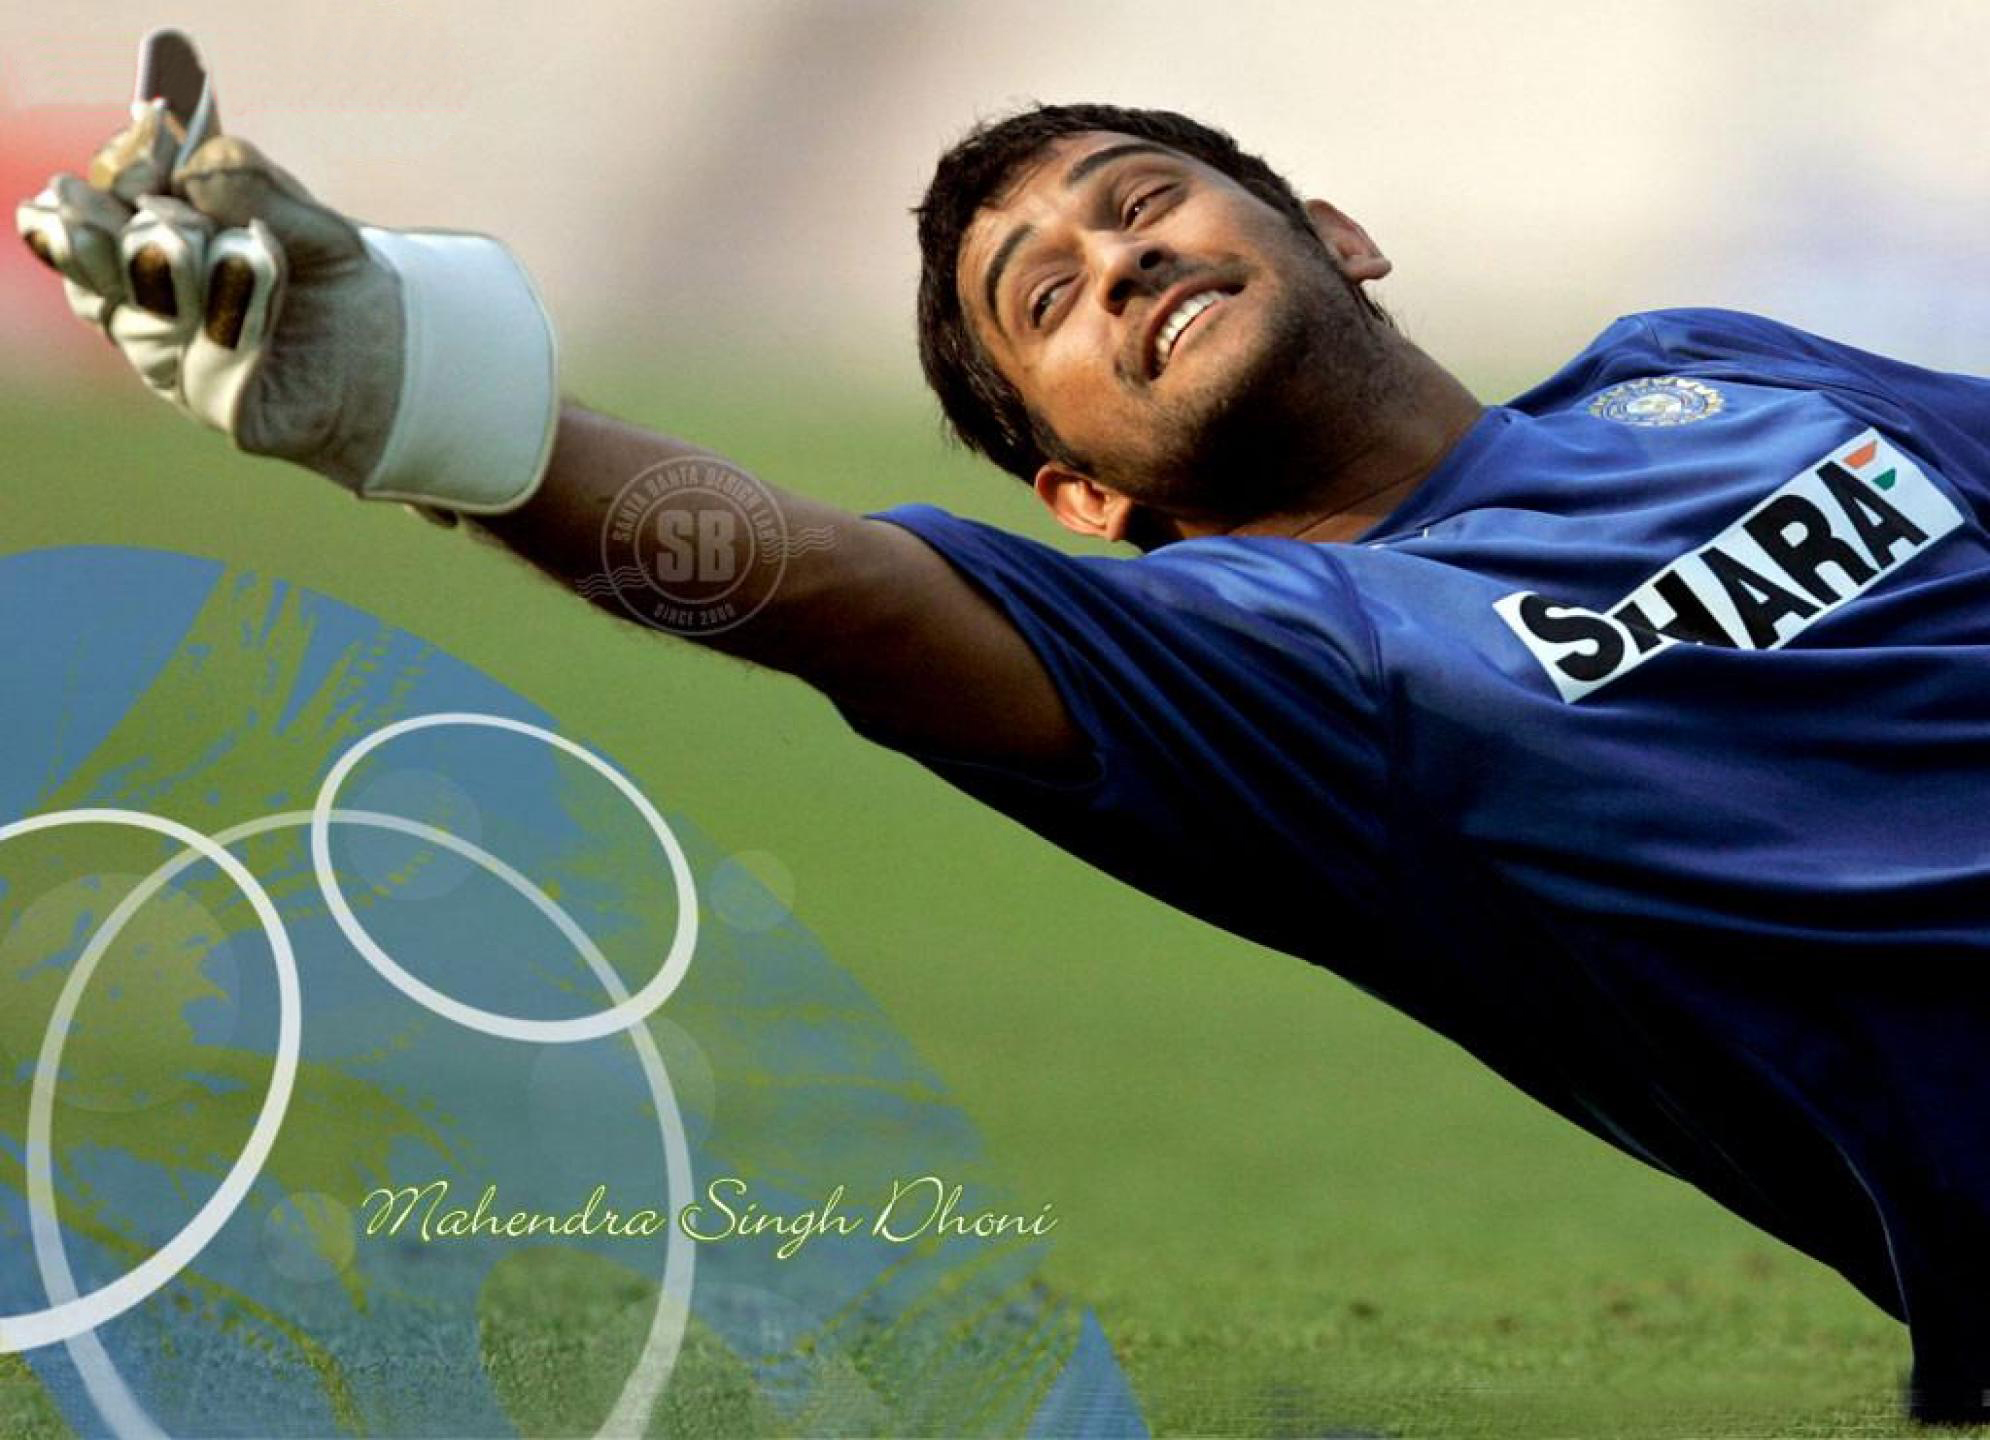 Indian cricket team captain M S dhoni high quality image gallery